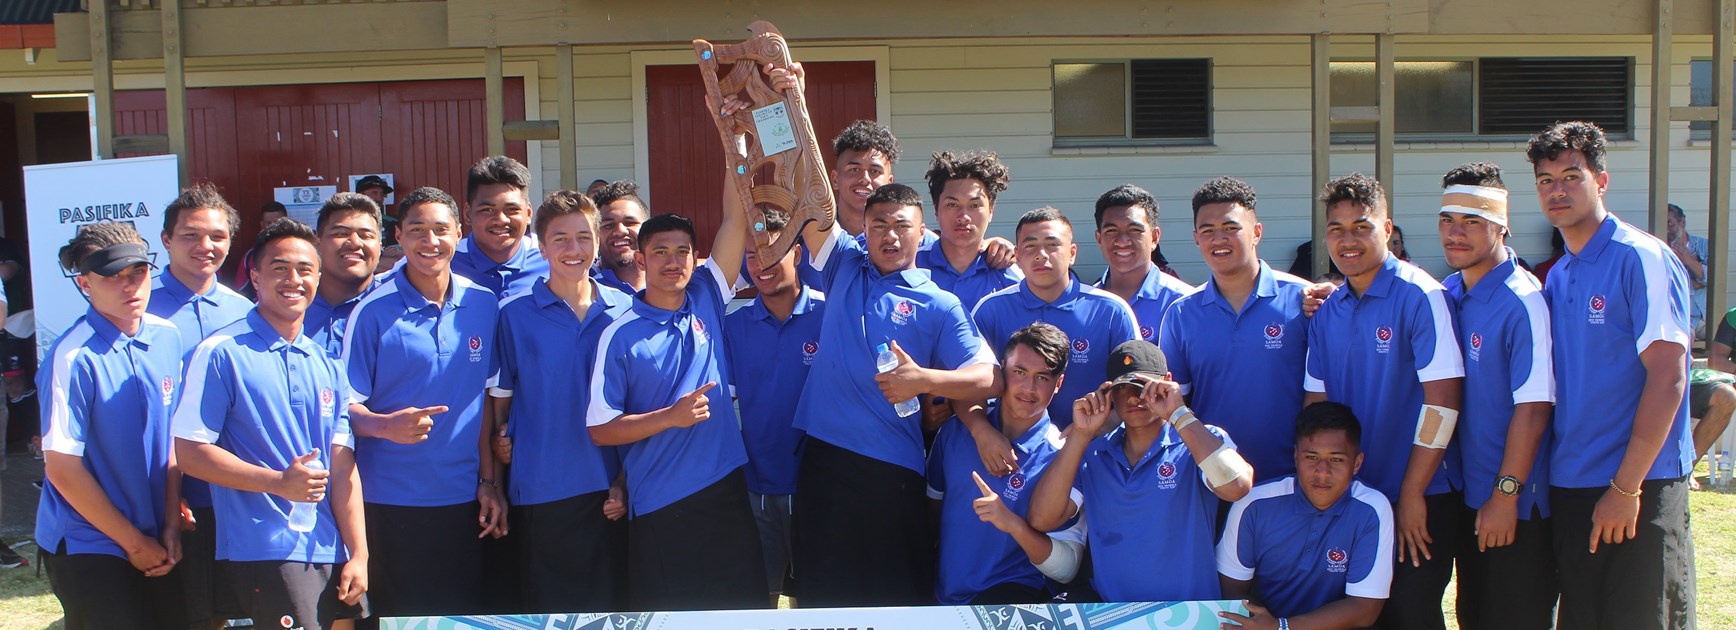 Second annual Pasifika Youth Cup under way again